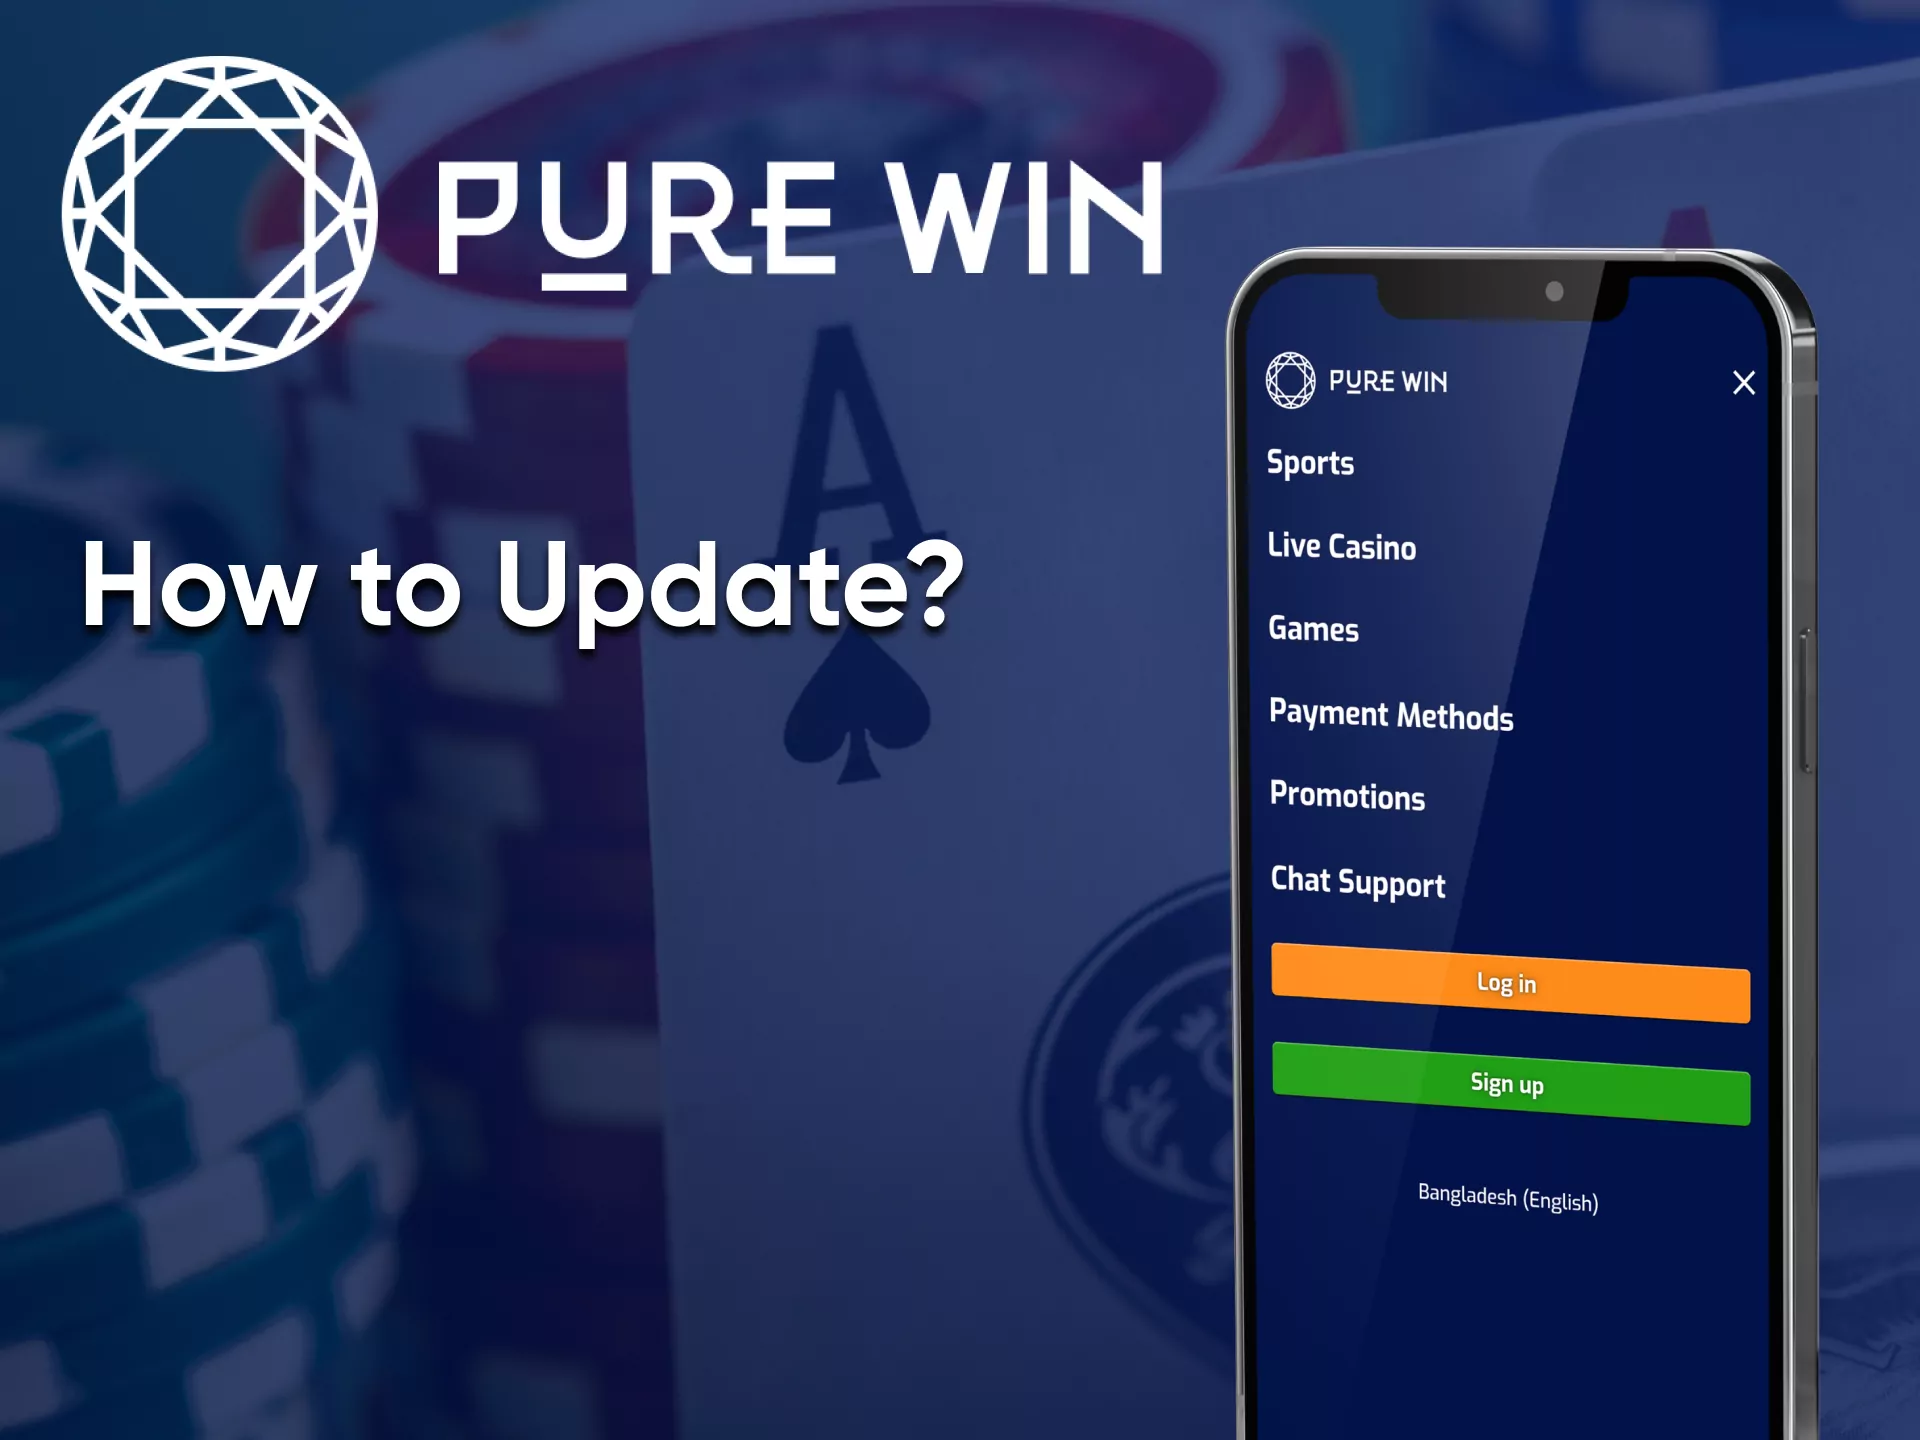 Shoose casino games at the site from Pure Win.